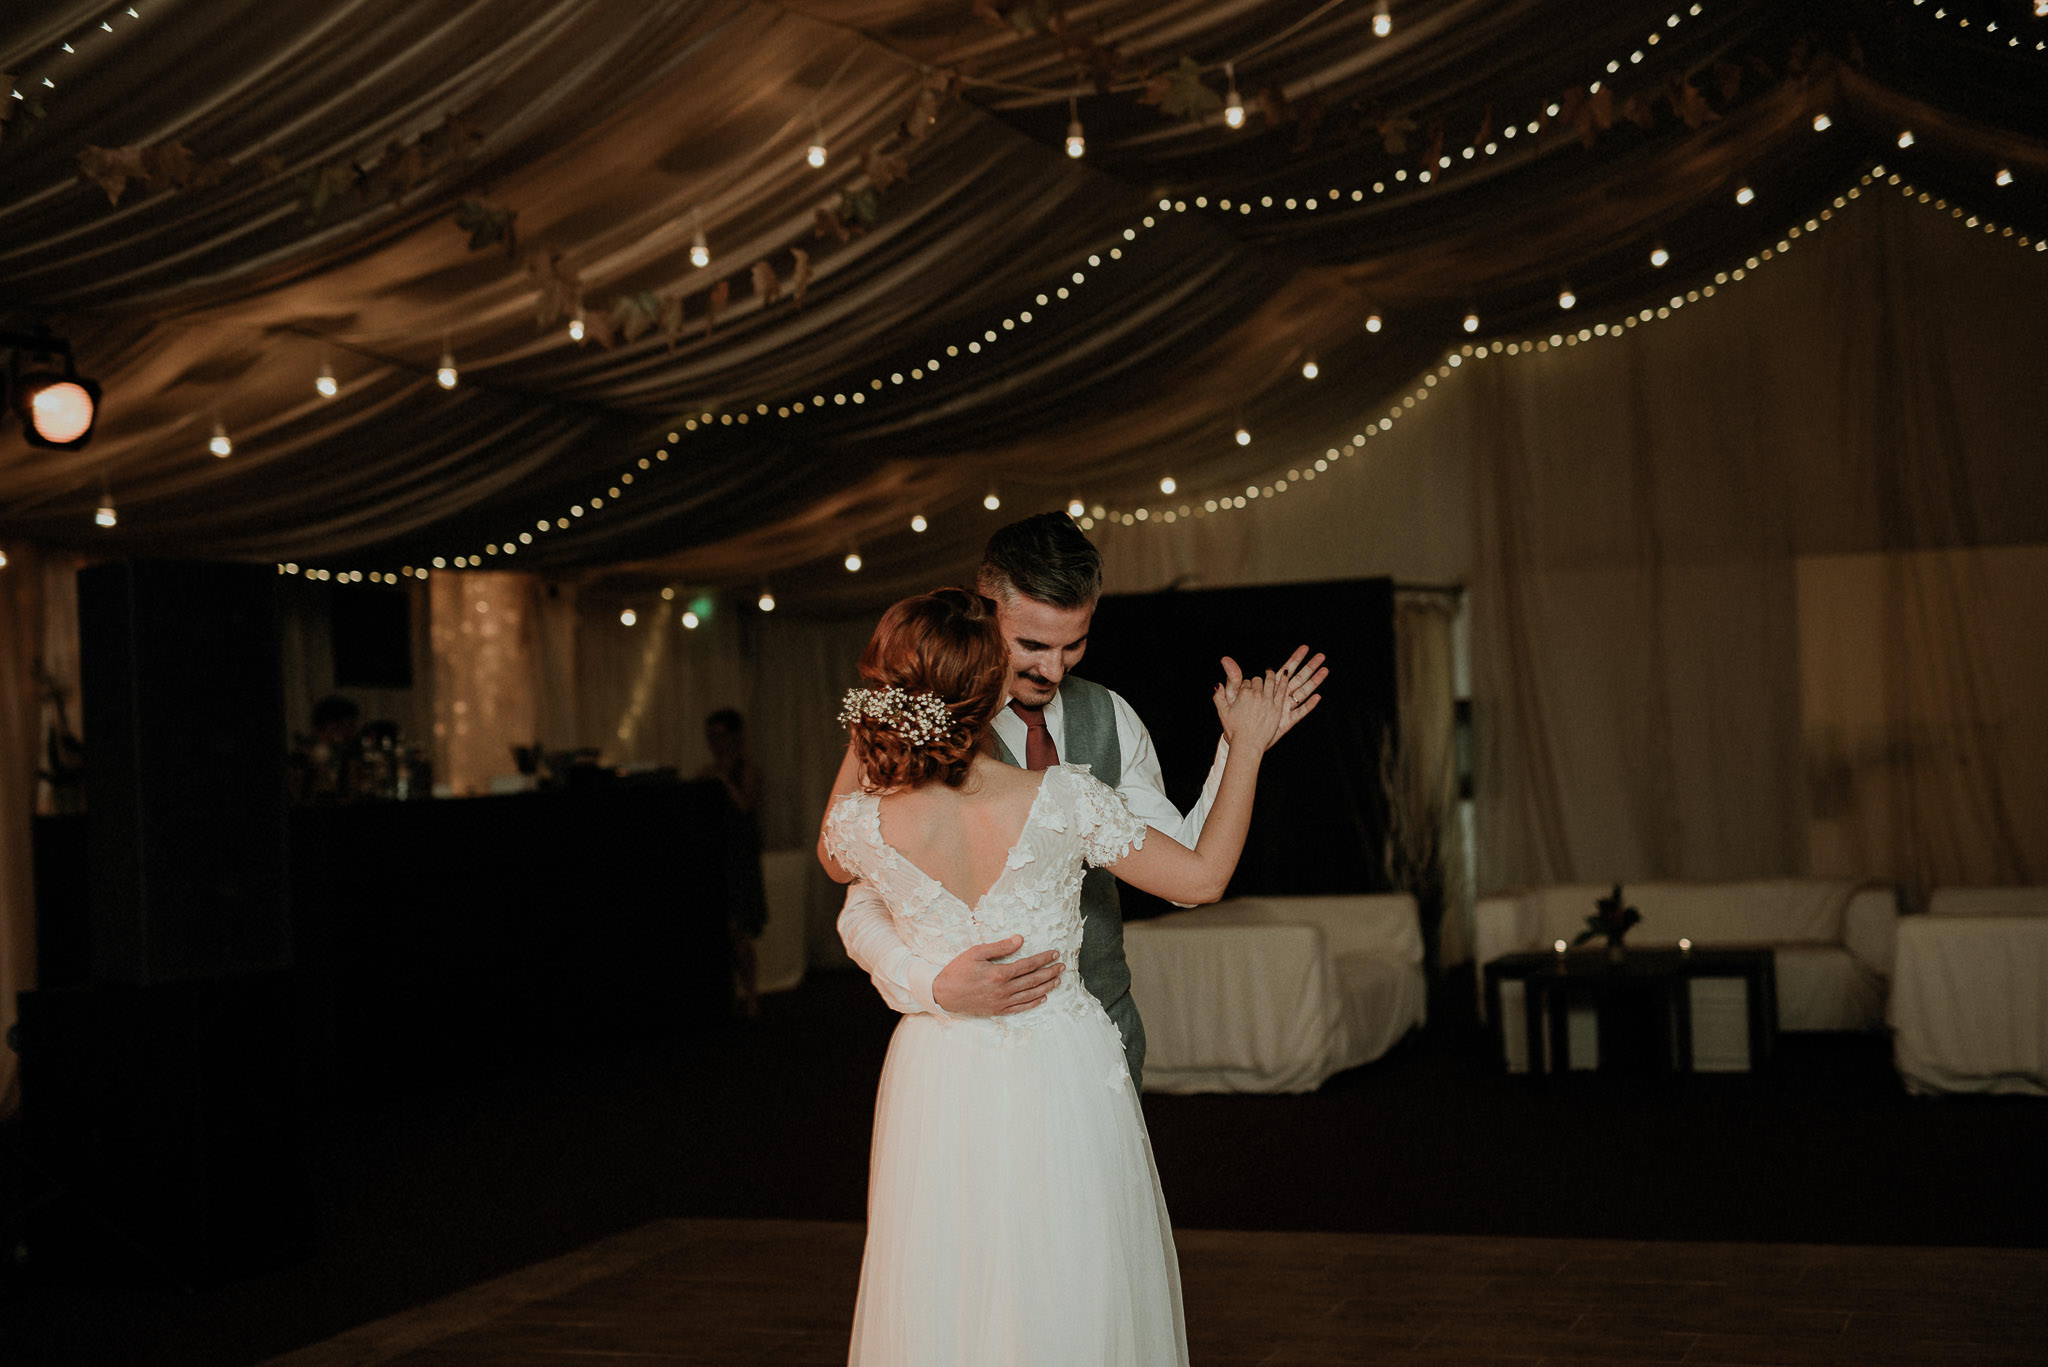 bride and groom share their first dance together